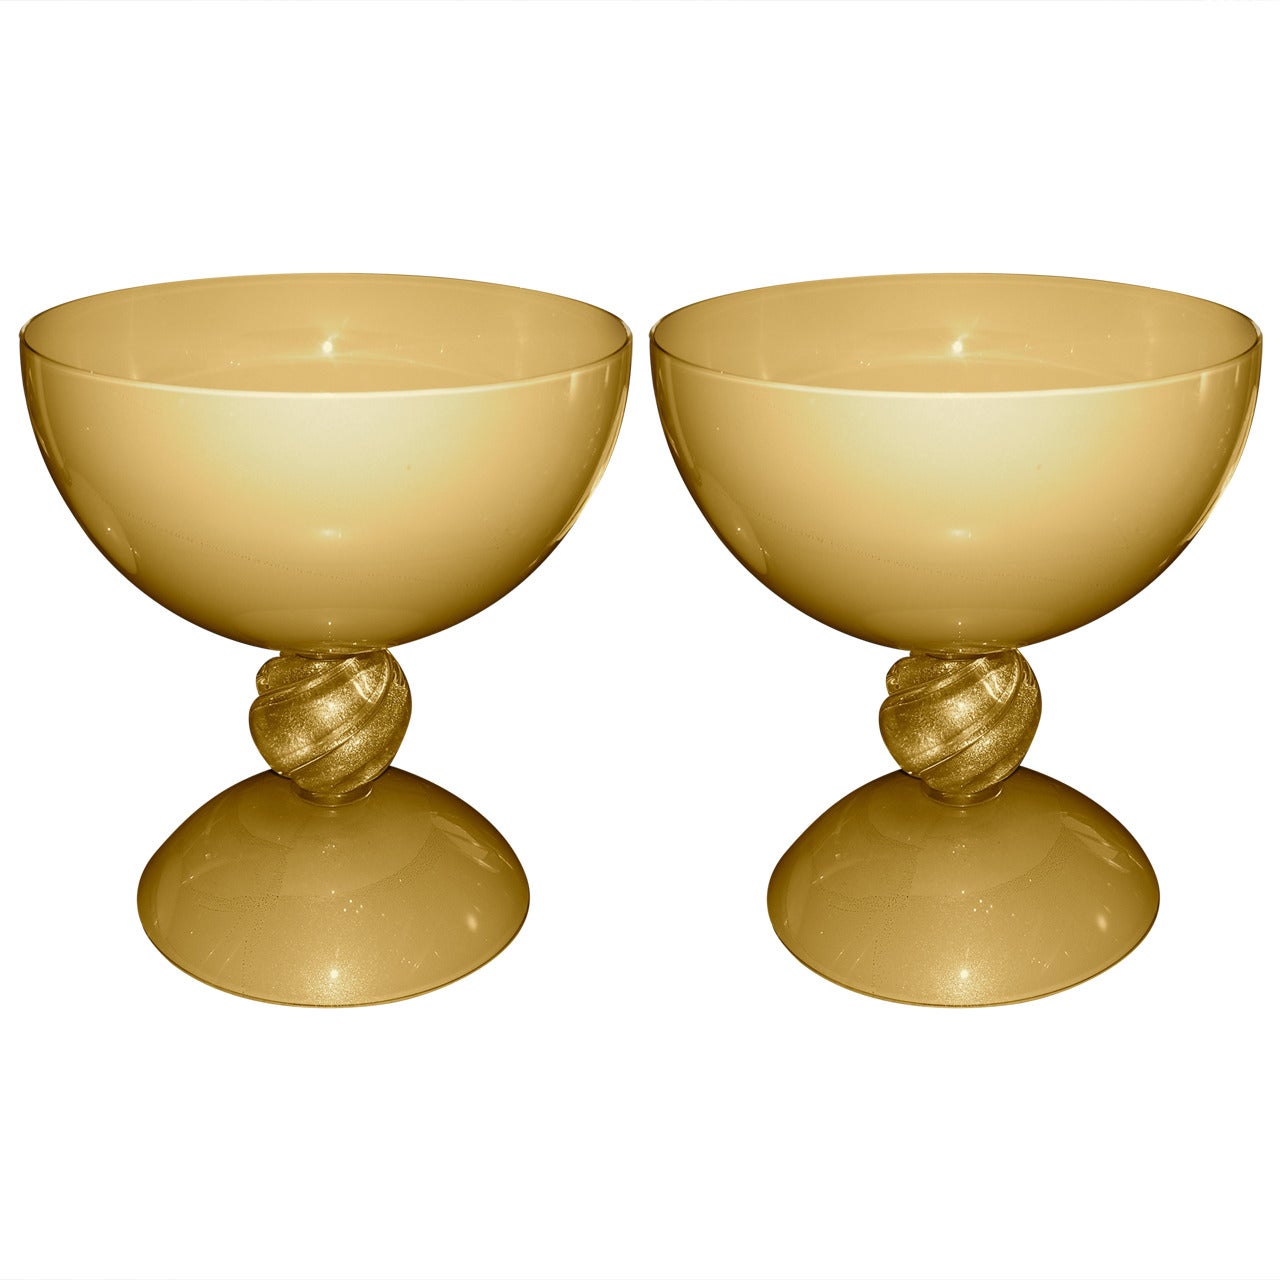 Alberto Dona Exceptional Italian Pair of Monumental Gold Ivory Blown Glass Bowls